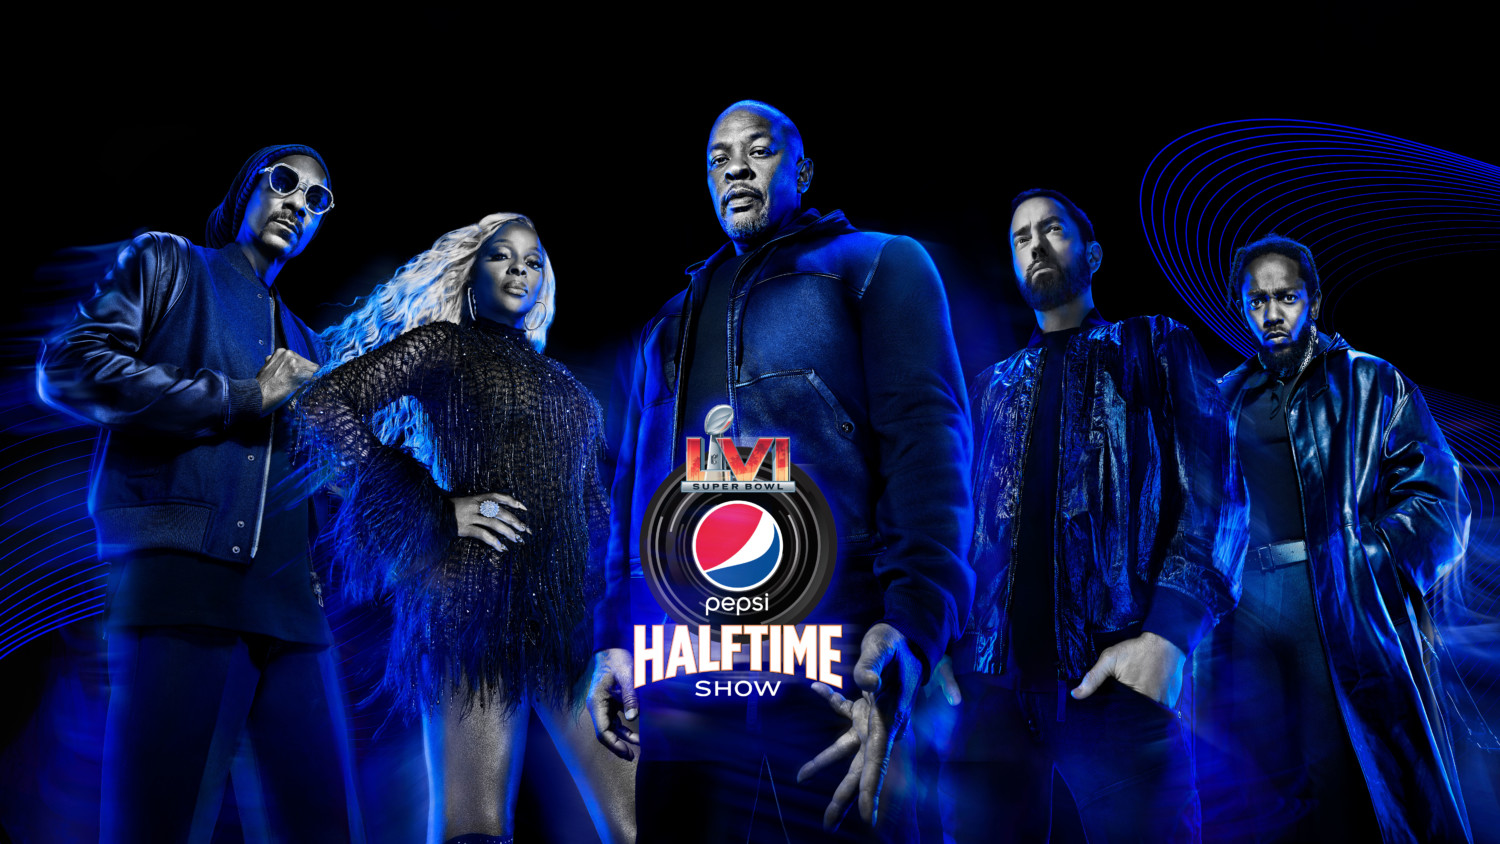 The Trailer For The 2022 Super Bowl Halftime Show Is Out With A Cast Of  All-Stars